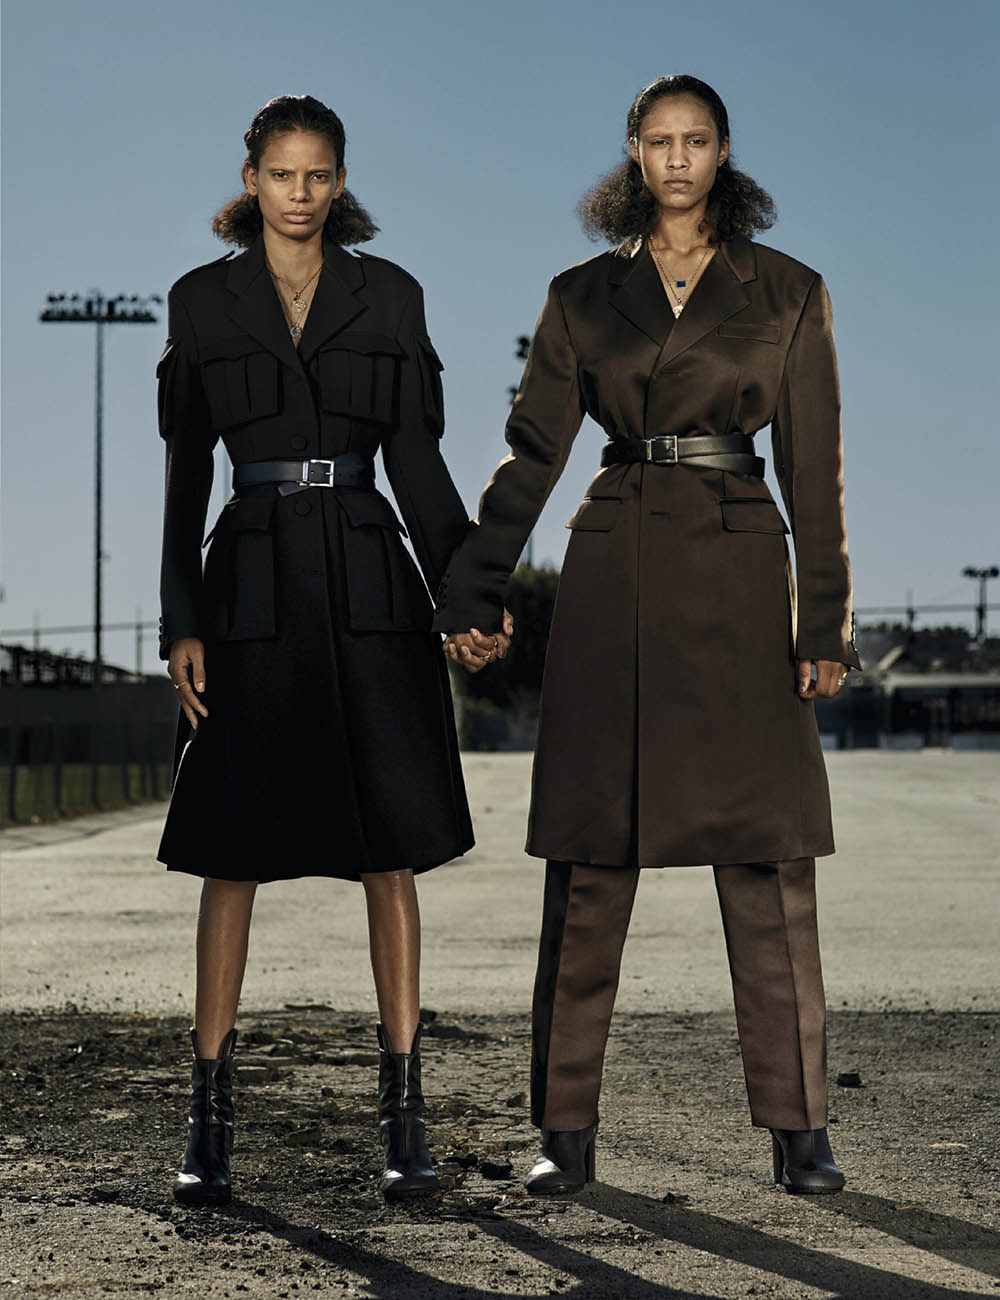 ''Two of a Kind'' by Ethan James Green for W Magazine Volume 3 2019